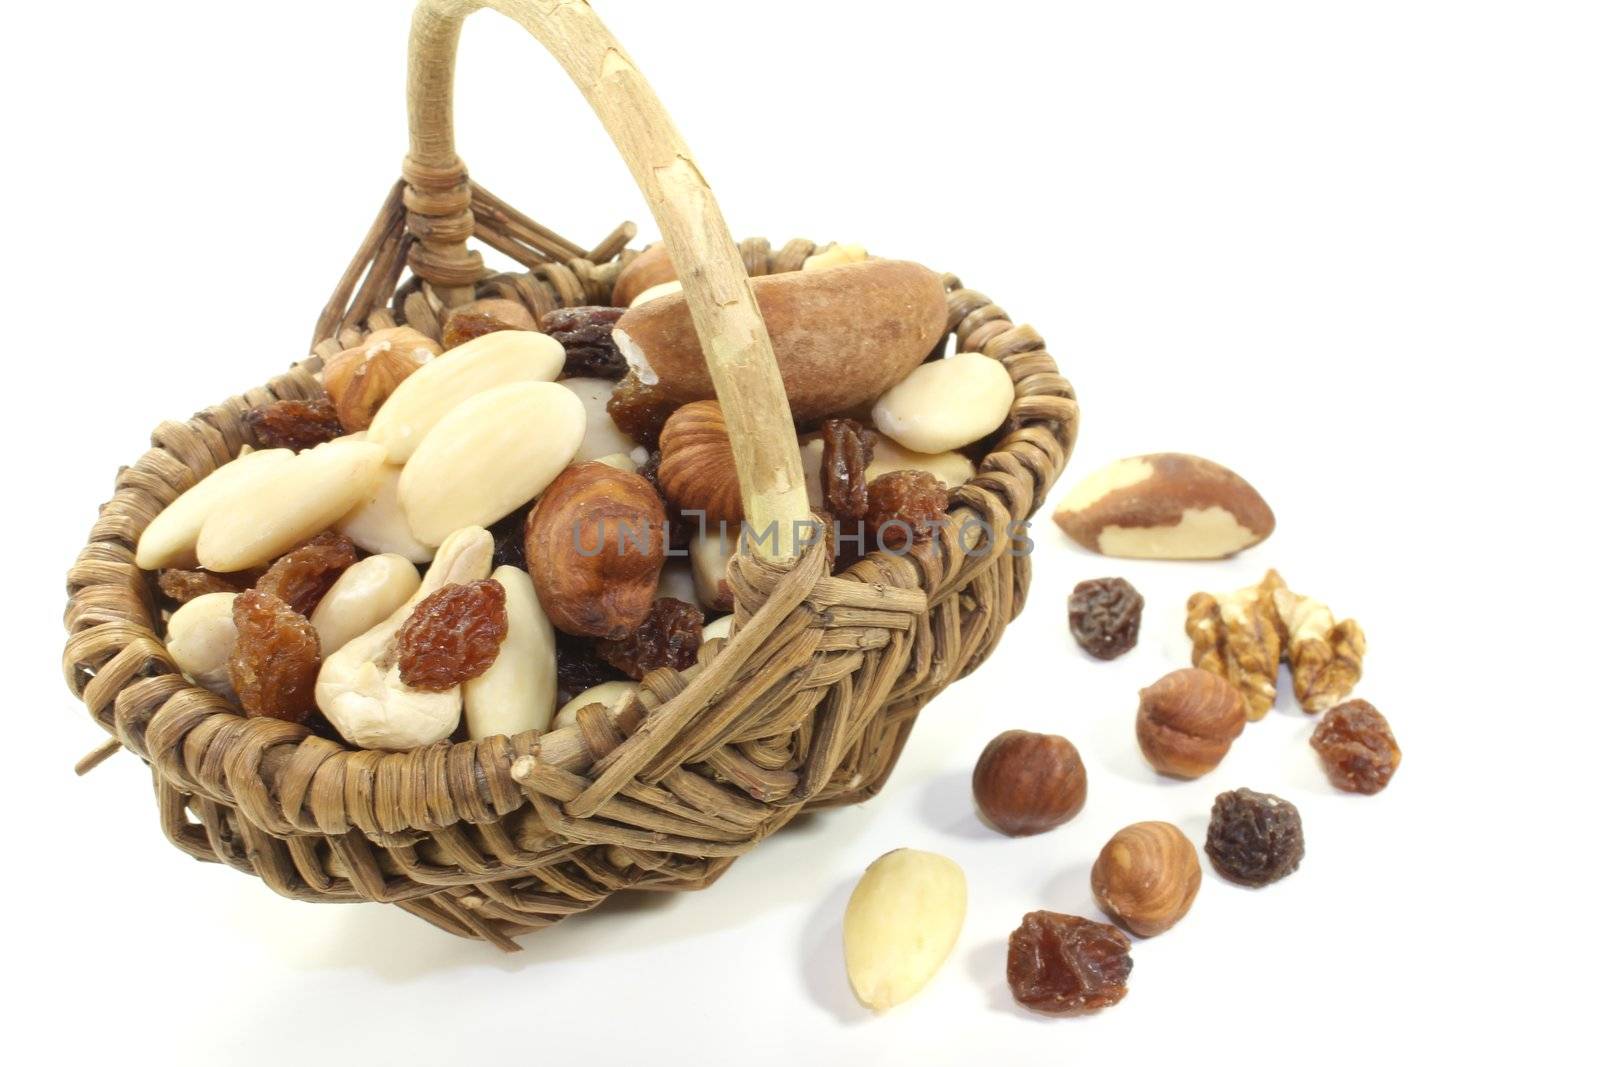 crunchy mixed nuts and raisins as a snack on a bright background